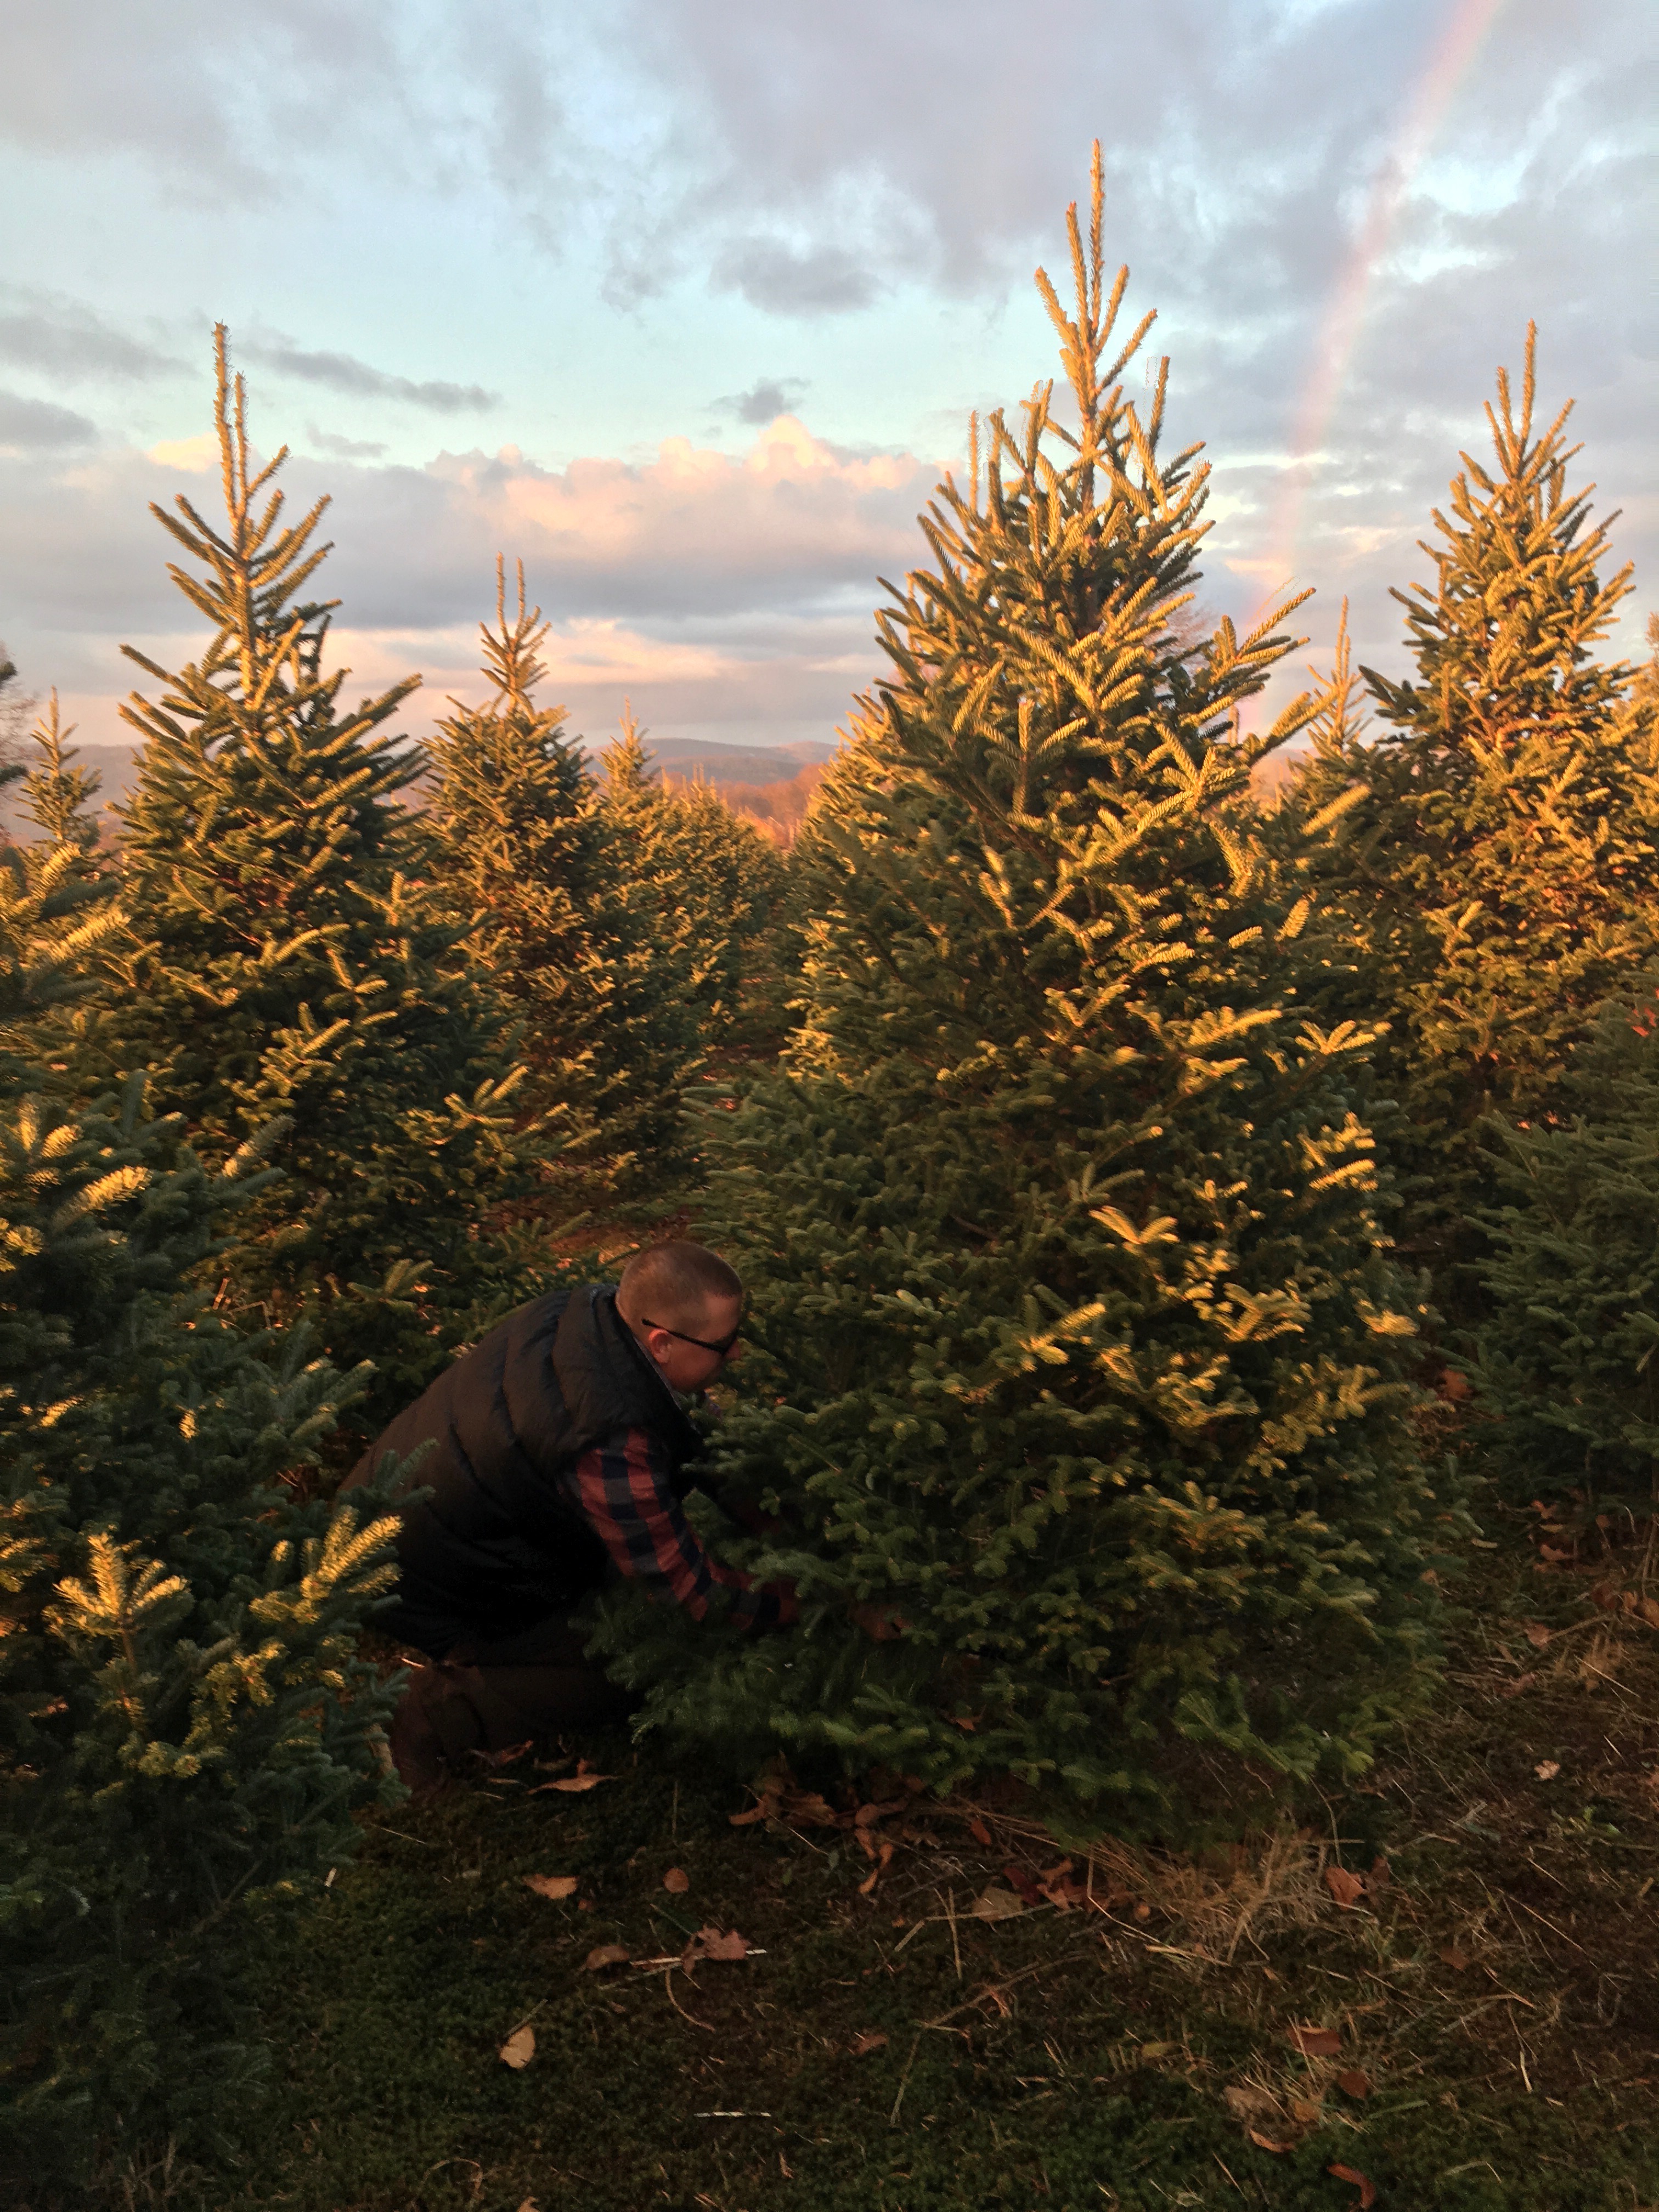 Finding the Perfect Christmas Tree - Cut Your Own Christmas Tree in New York - Frolic Through Life